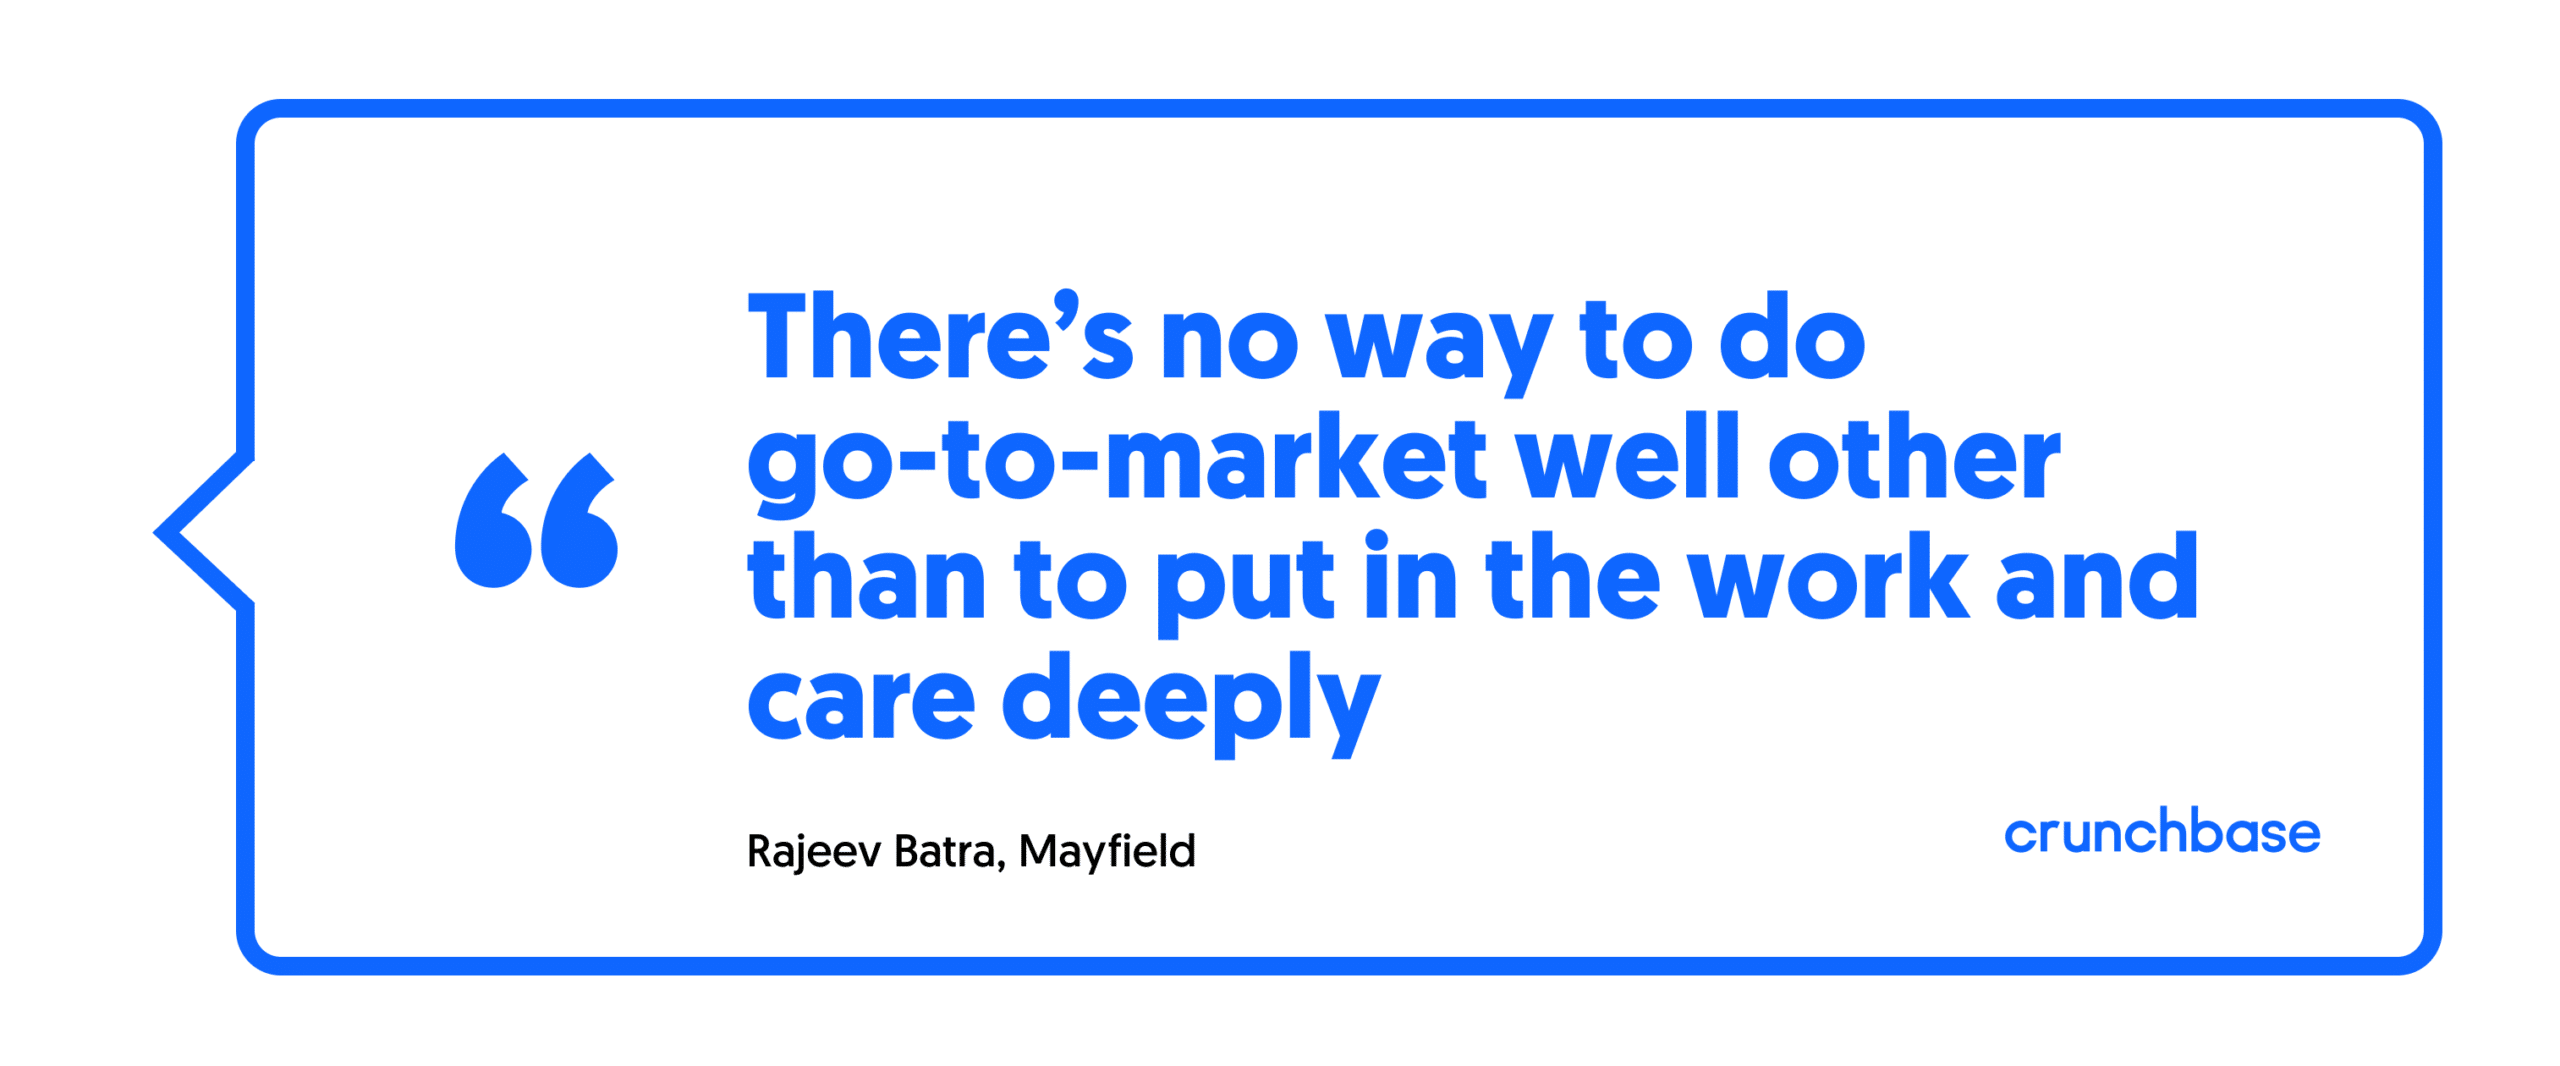 There's no way to do go-to-market well other than to put in the work and care deeply - Rajeev Batra, Mayfield